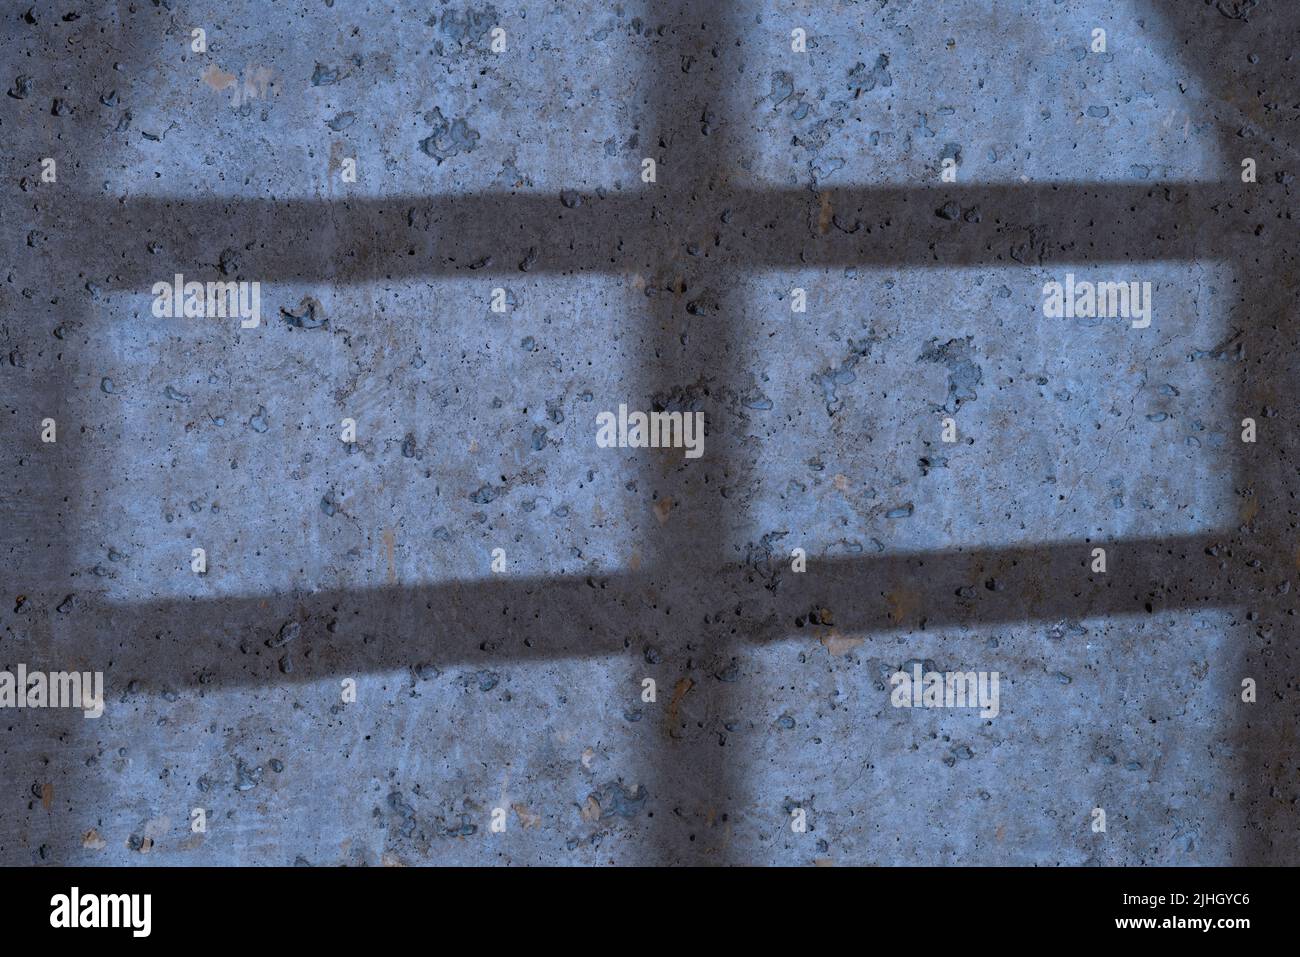 Shadow from a barred window on a rough concrete wall. Moonlight lighting. Prison, jail or basement theme Stock Photo